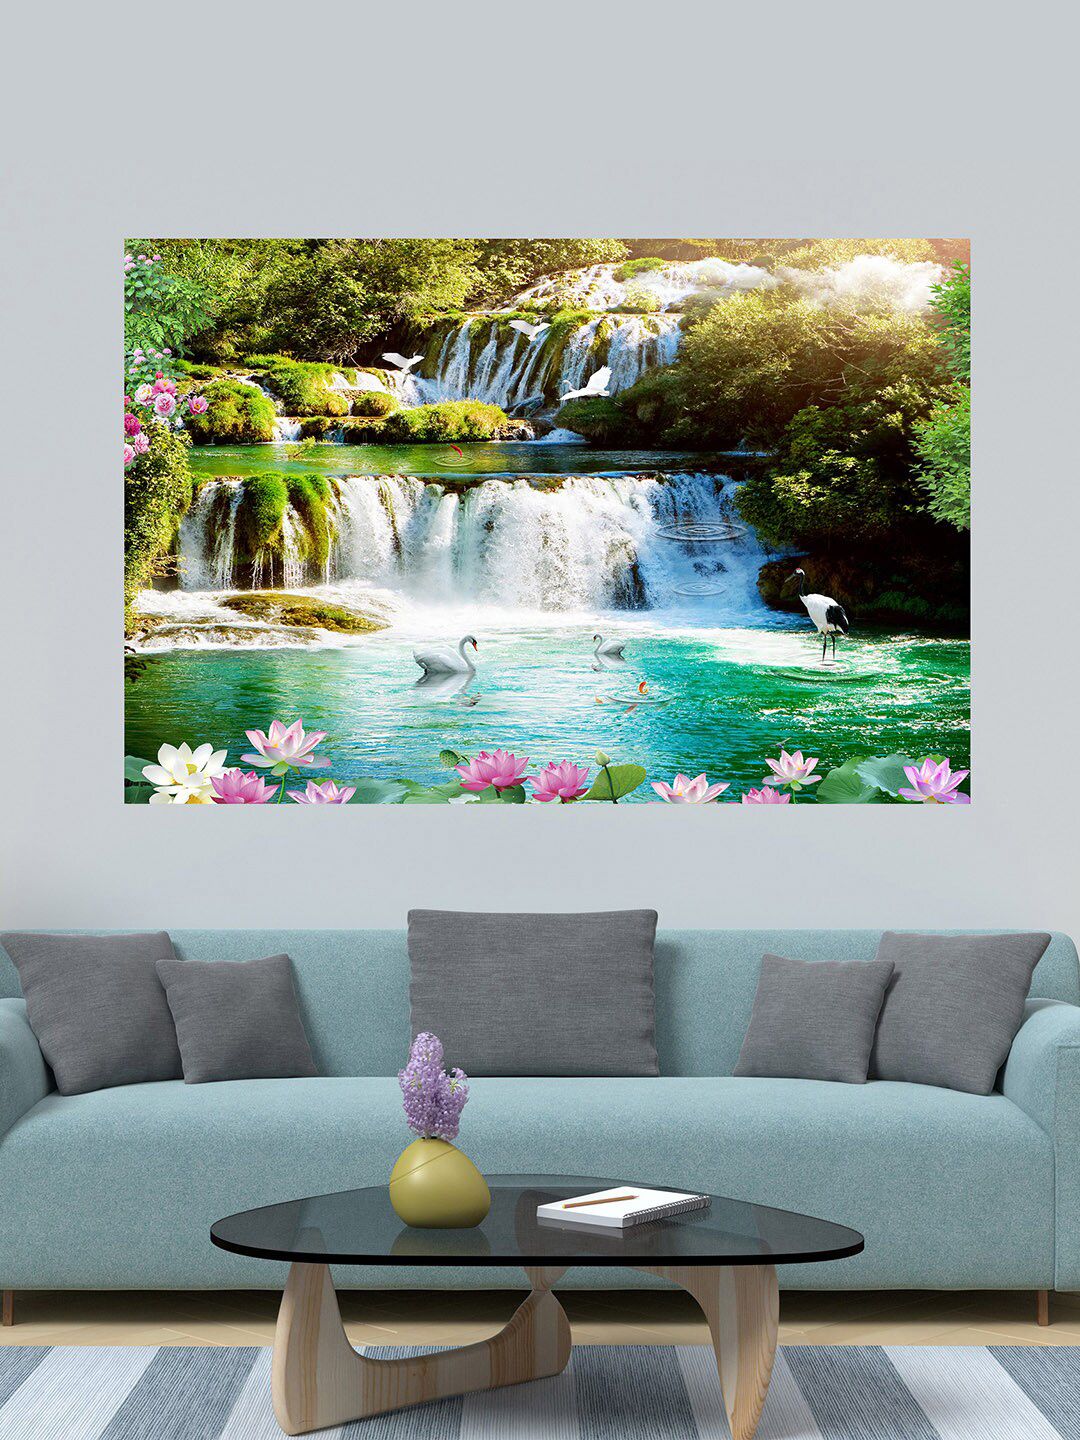 WENS Green & Blue Printed Waterfall Good Fortune Self Adhesive Wall Poster for Home Decor Price in India